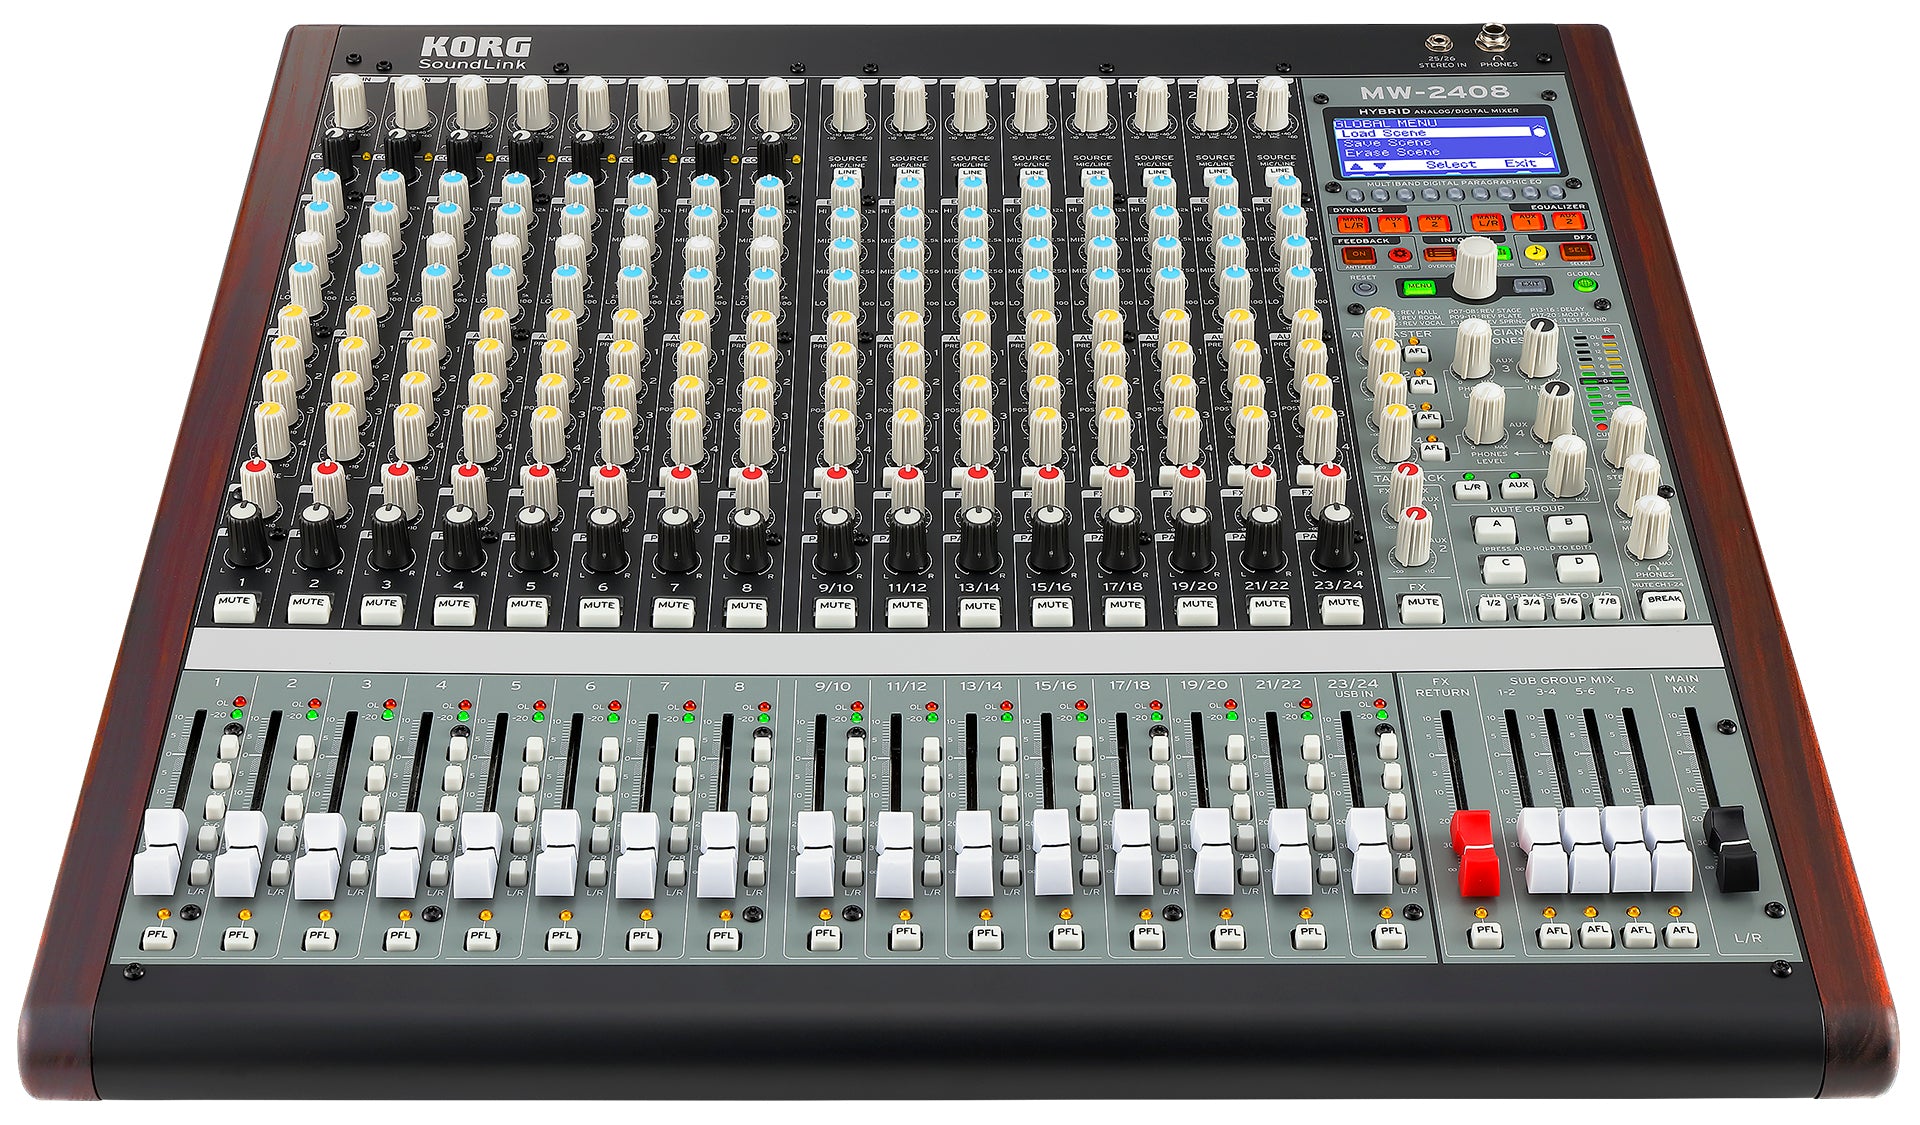 SoundLink MW-2408 24-channel Hybrid Mixer KORG USA Official Store